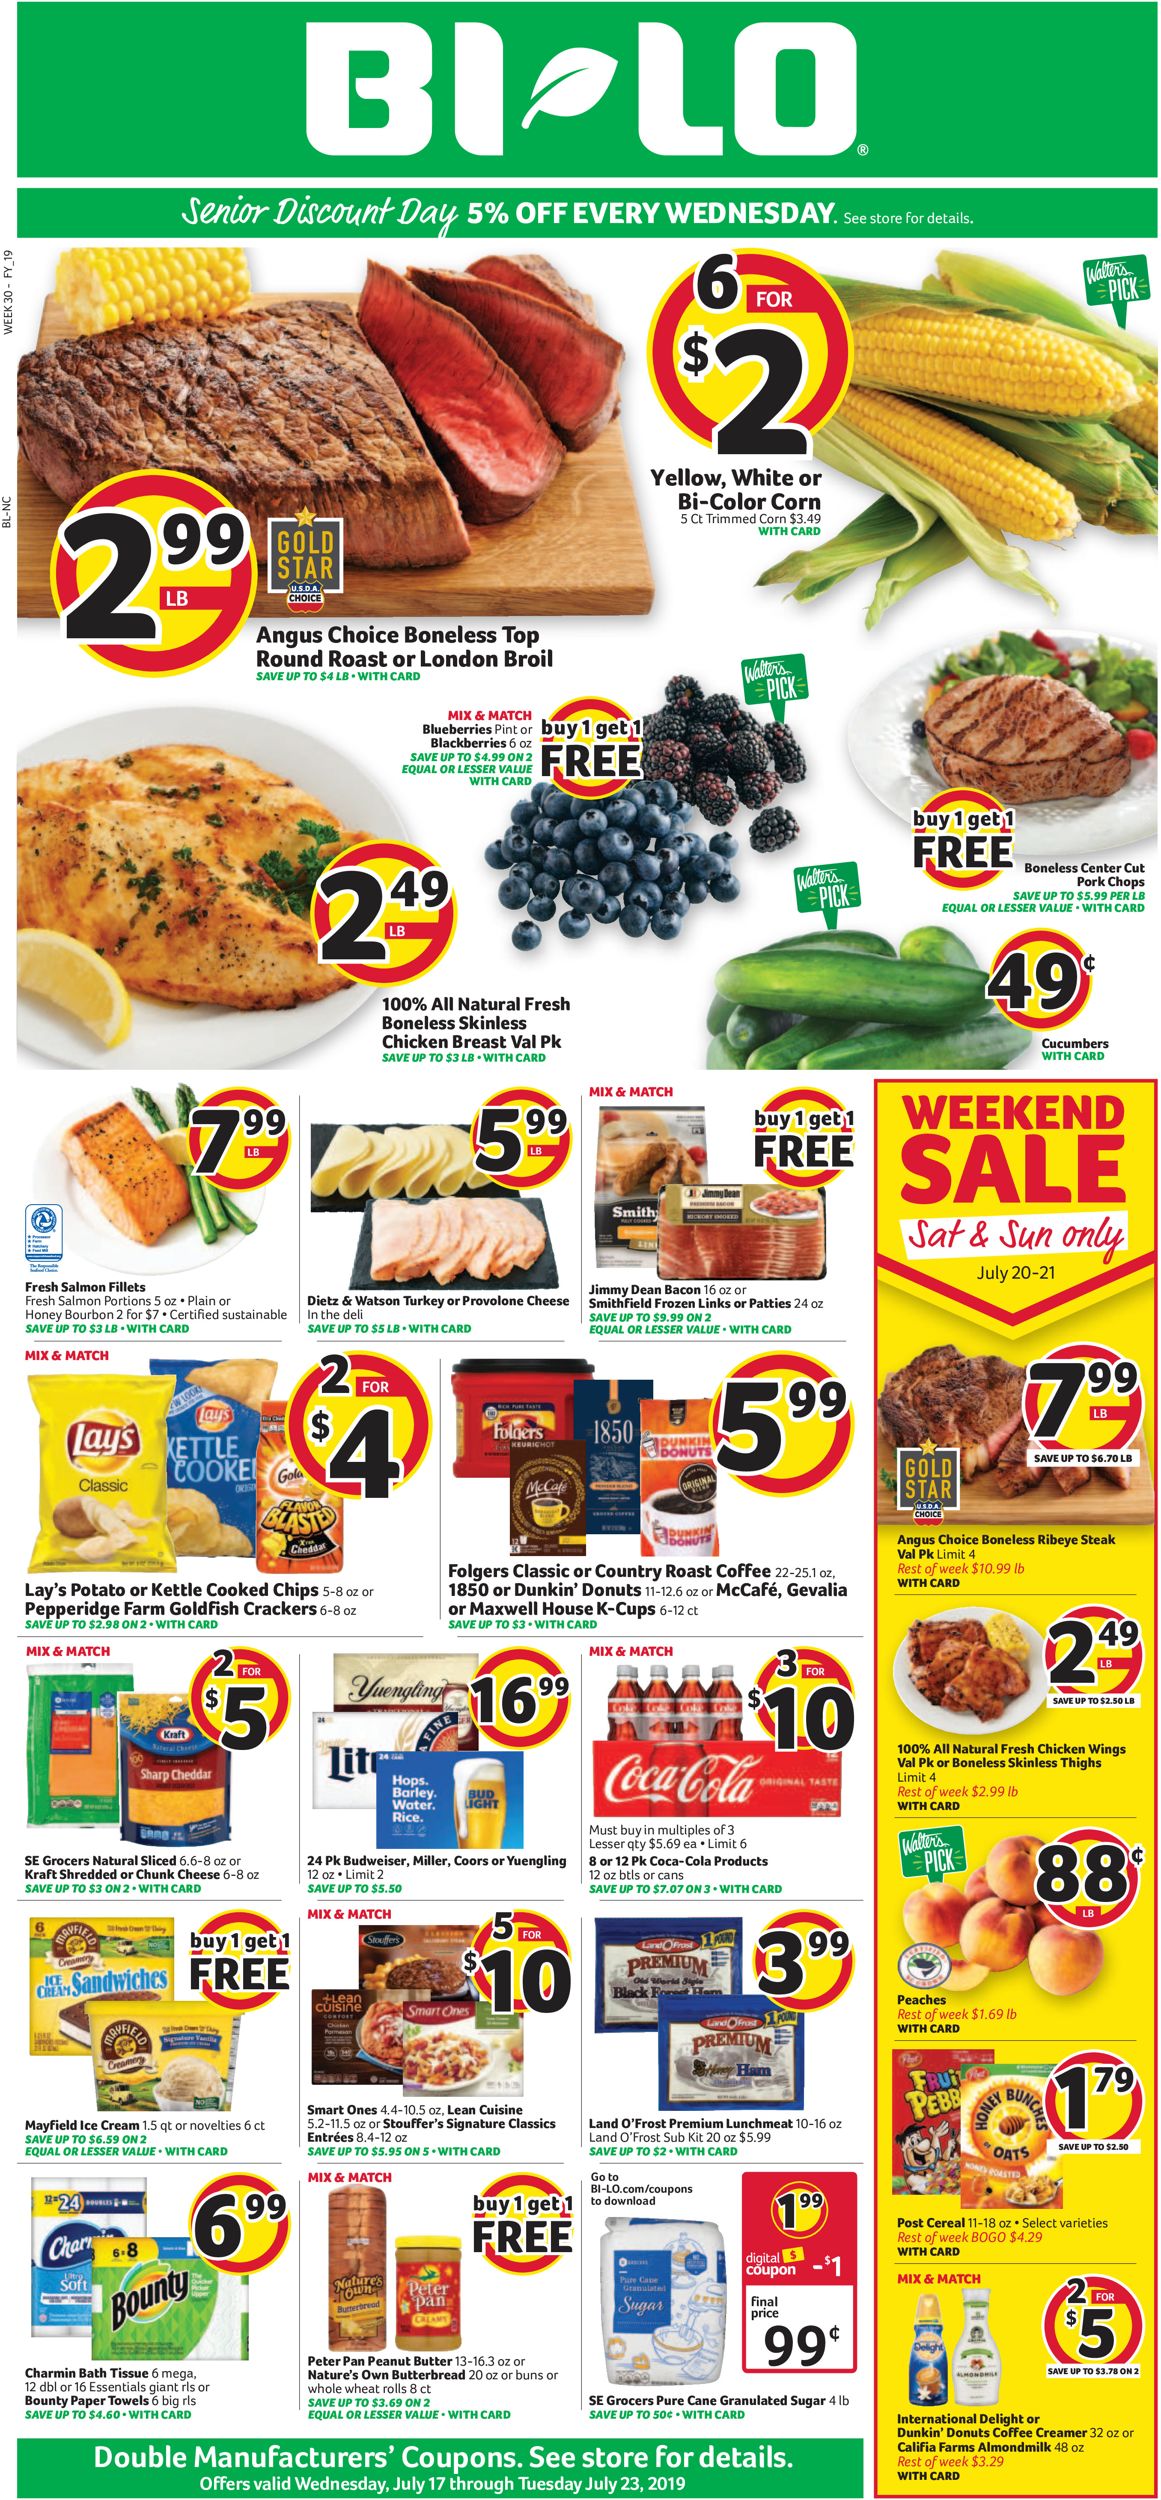 BI-LO Current weekly ad 07/17 - 07/23/2019 - frequent-ads.com